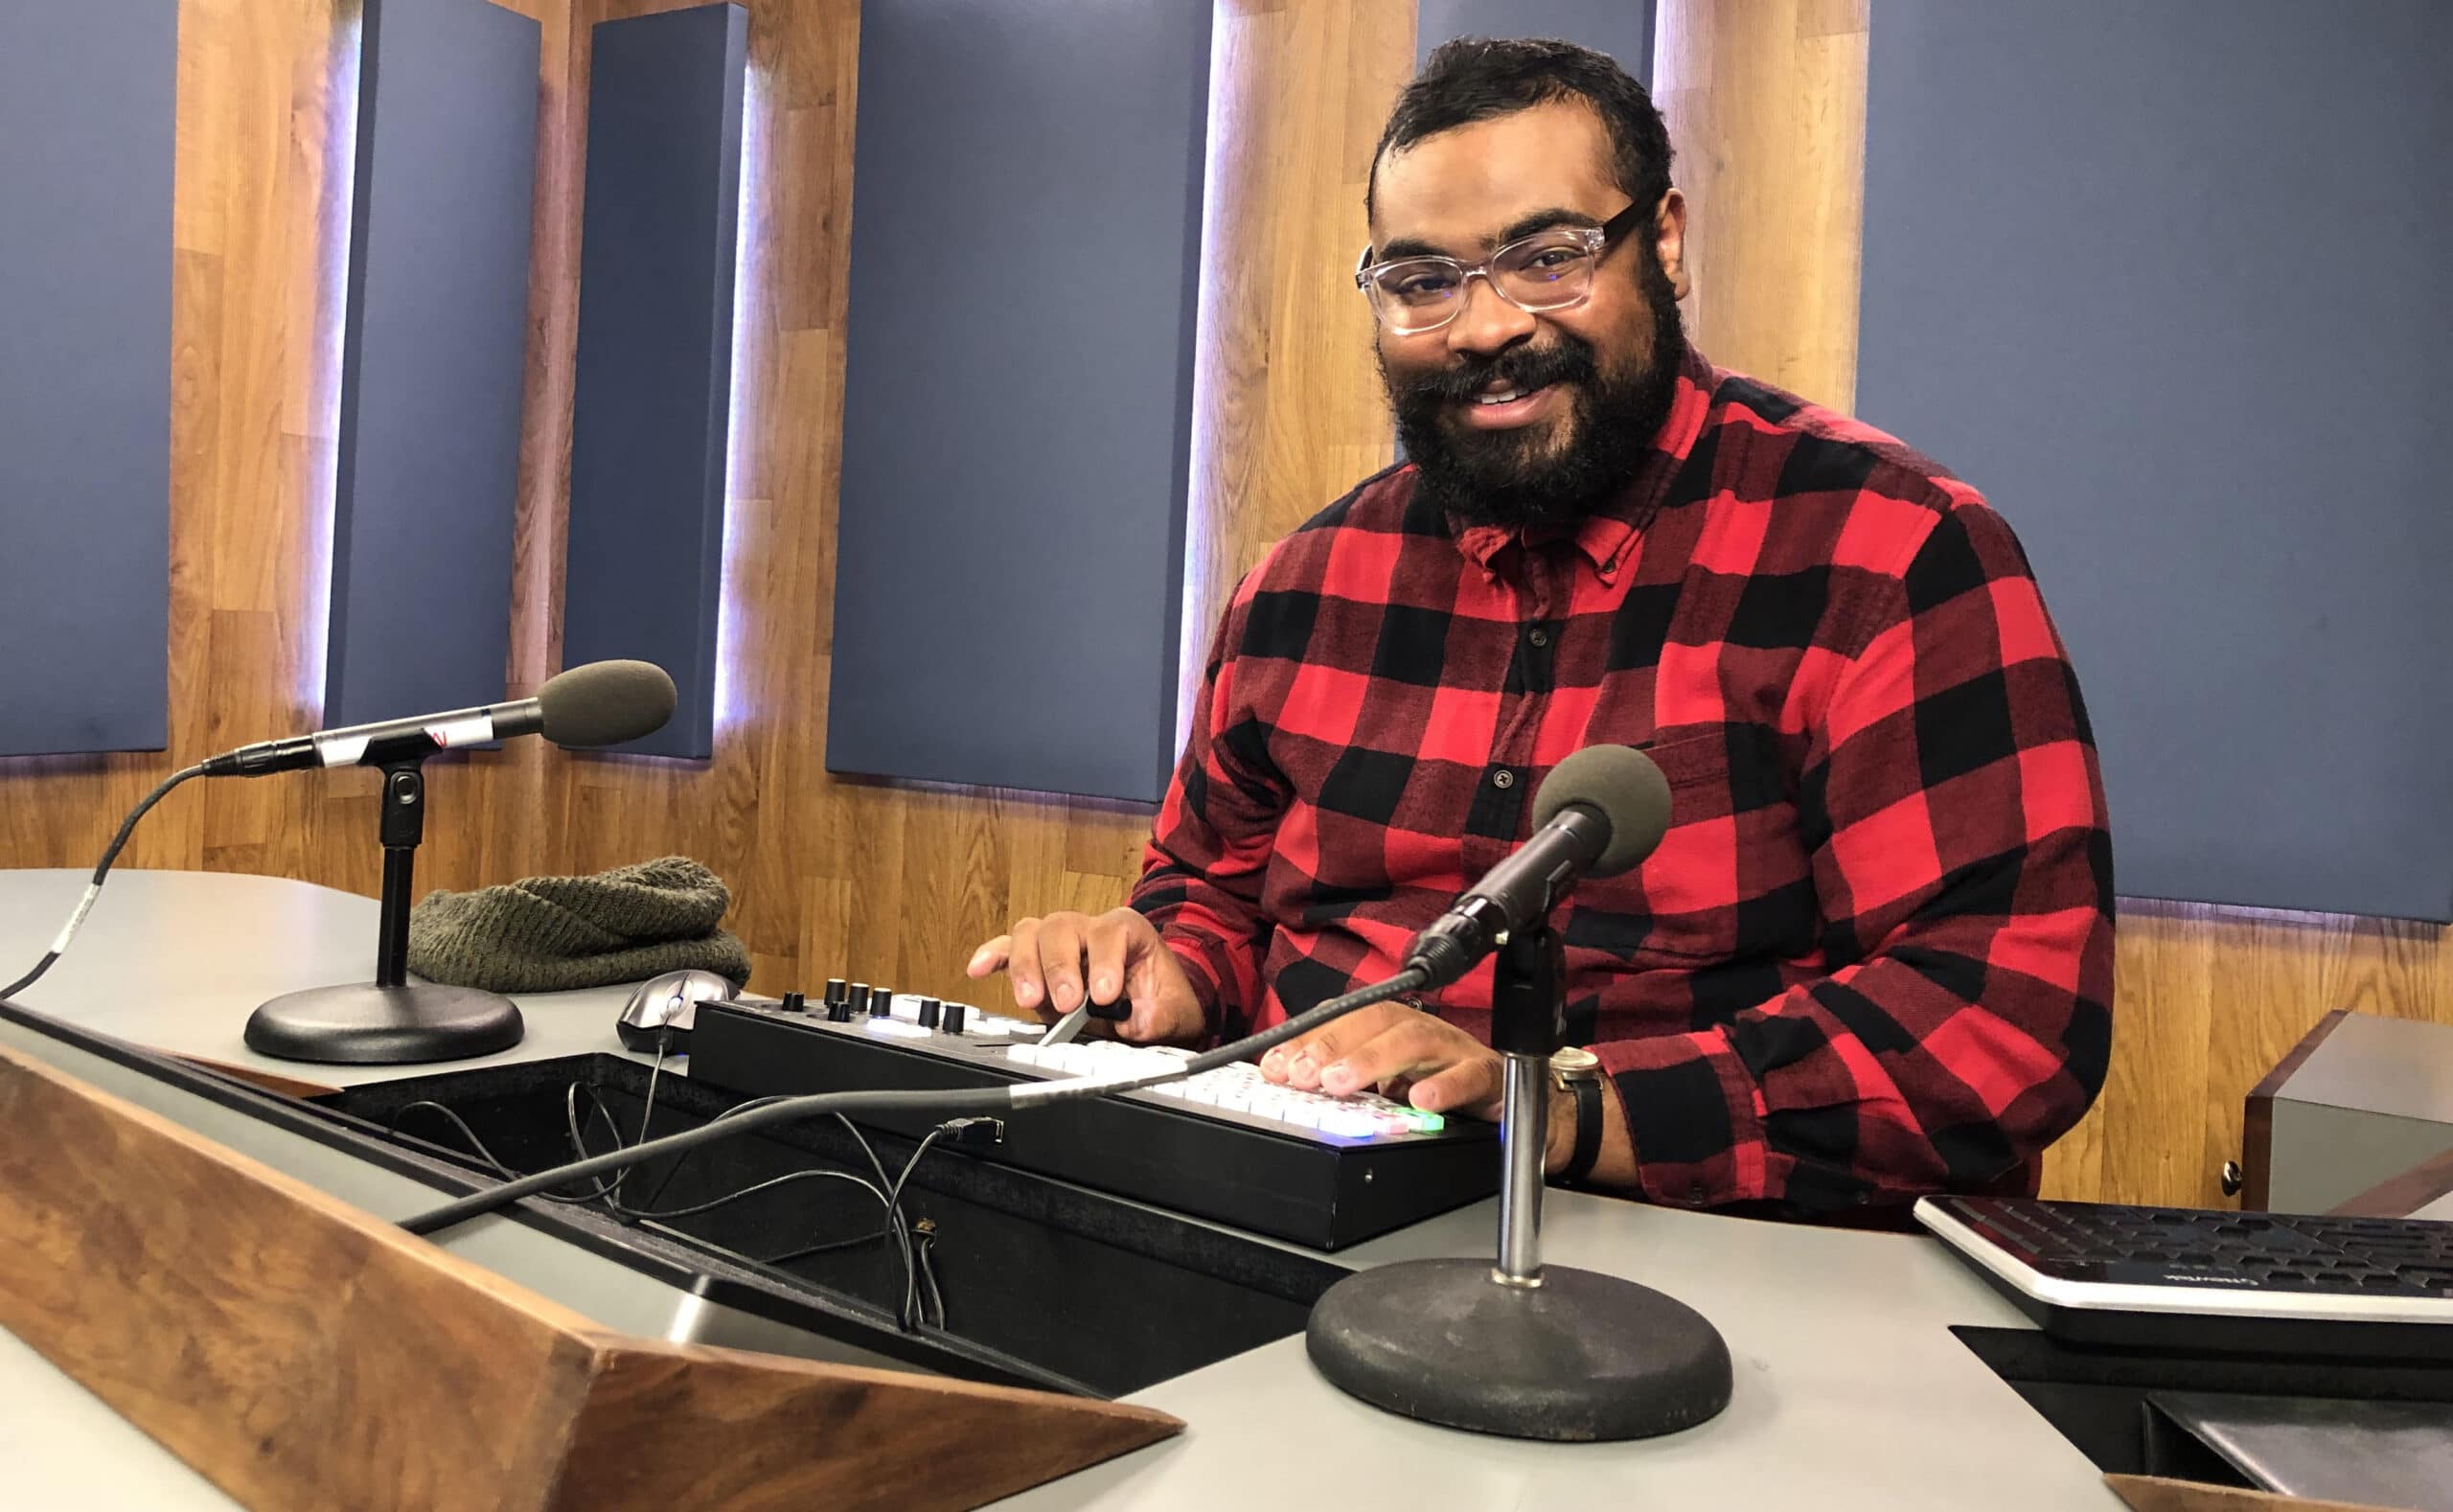 Image of a smiling Black man in a red & black check shirt sitting behind a podcast / audio recording set up.